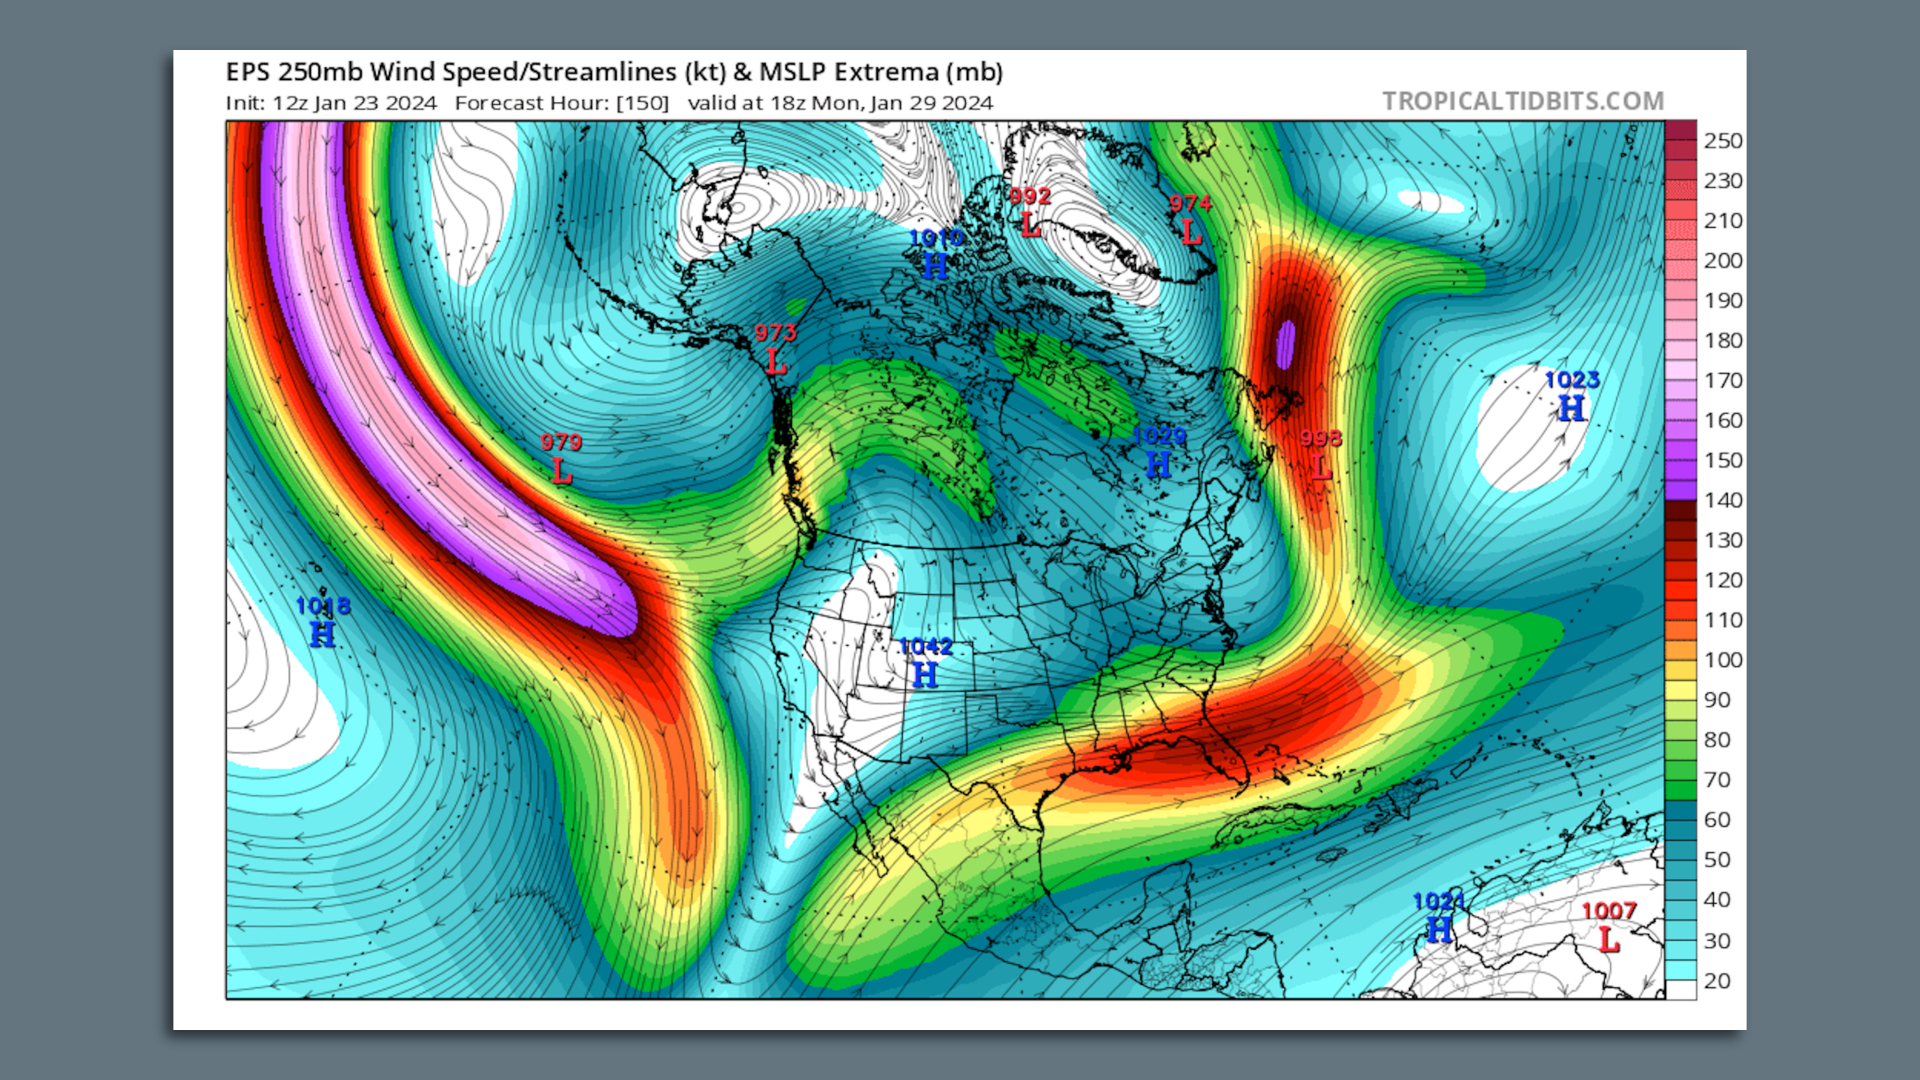 Map showing jet stream winds blowing across the Pacific Ocean into North America and across it.